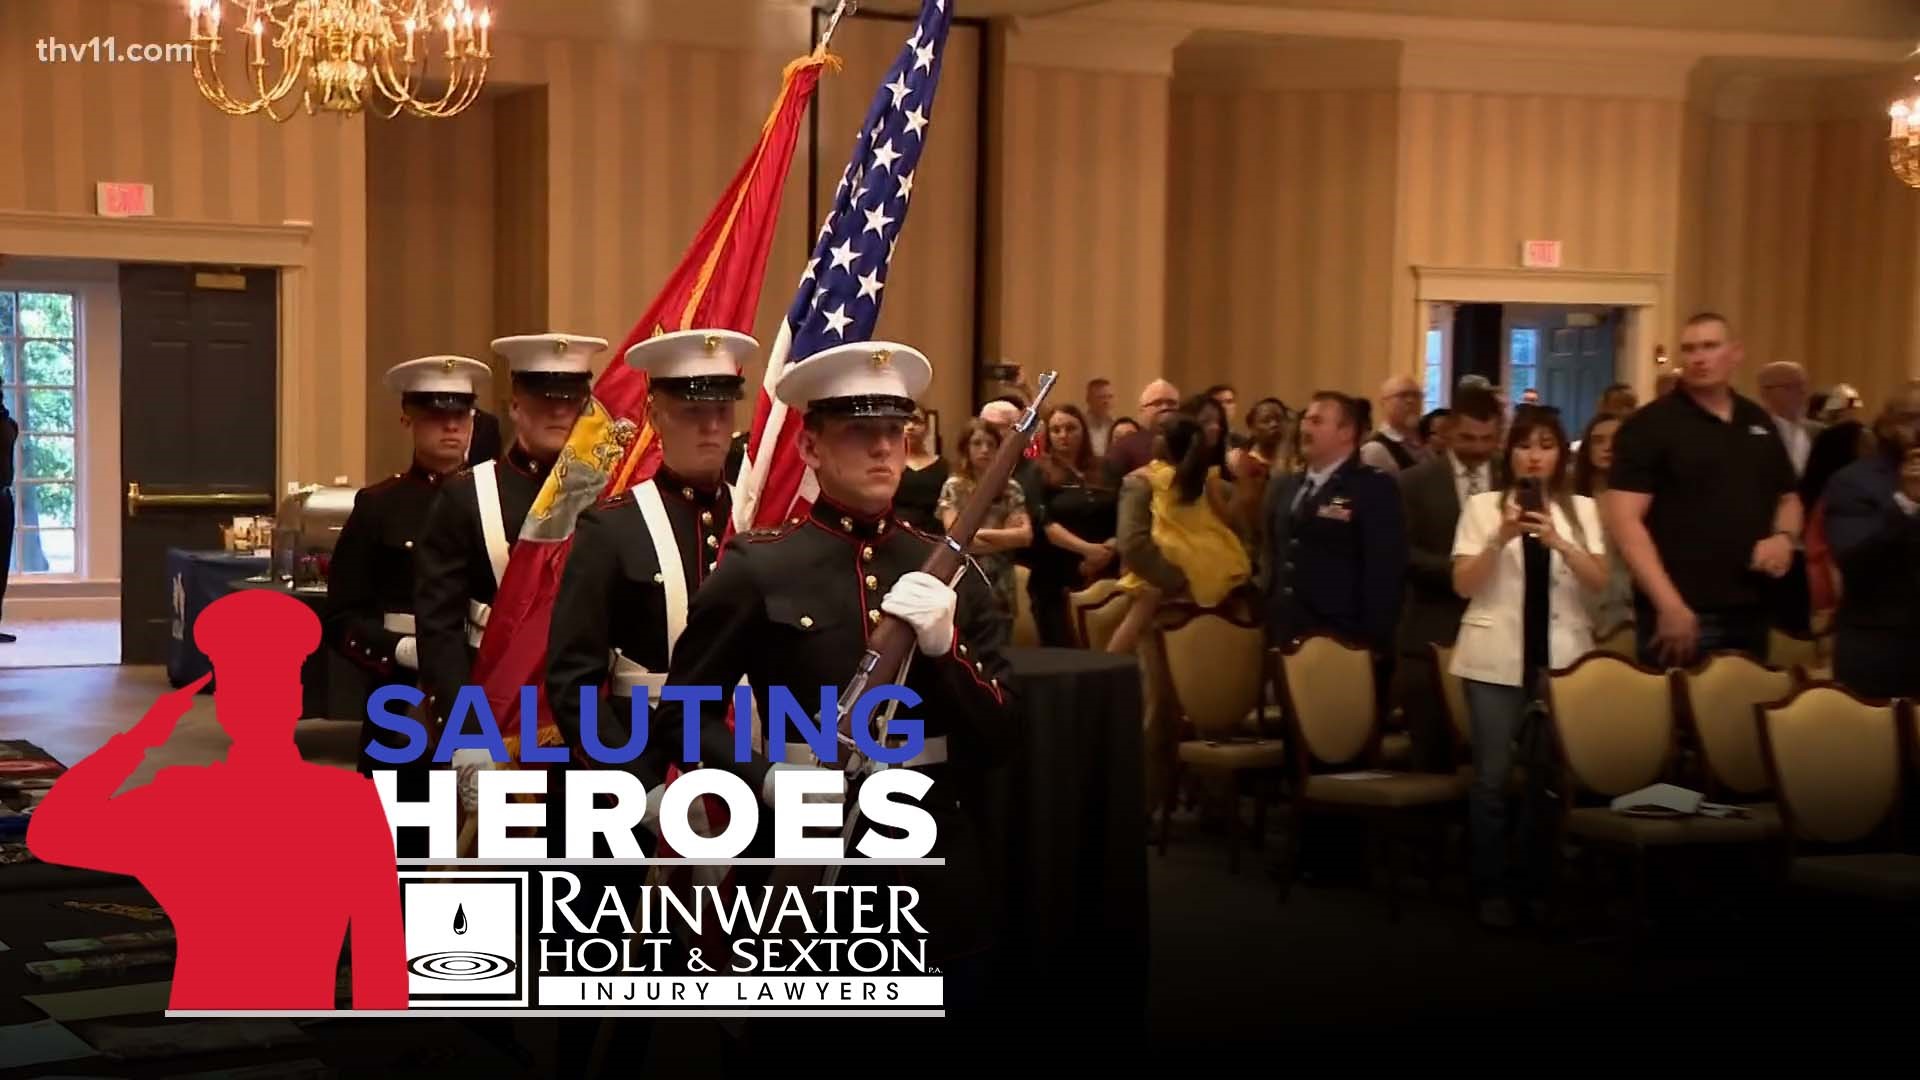 It's the season of celebration, with many graduations, proms, and awards ceremonies. Now, we're saluting an organization celebrating the heroes who join the military